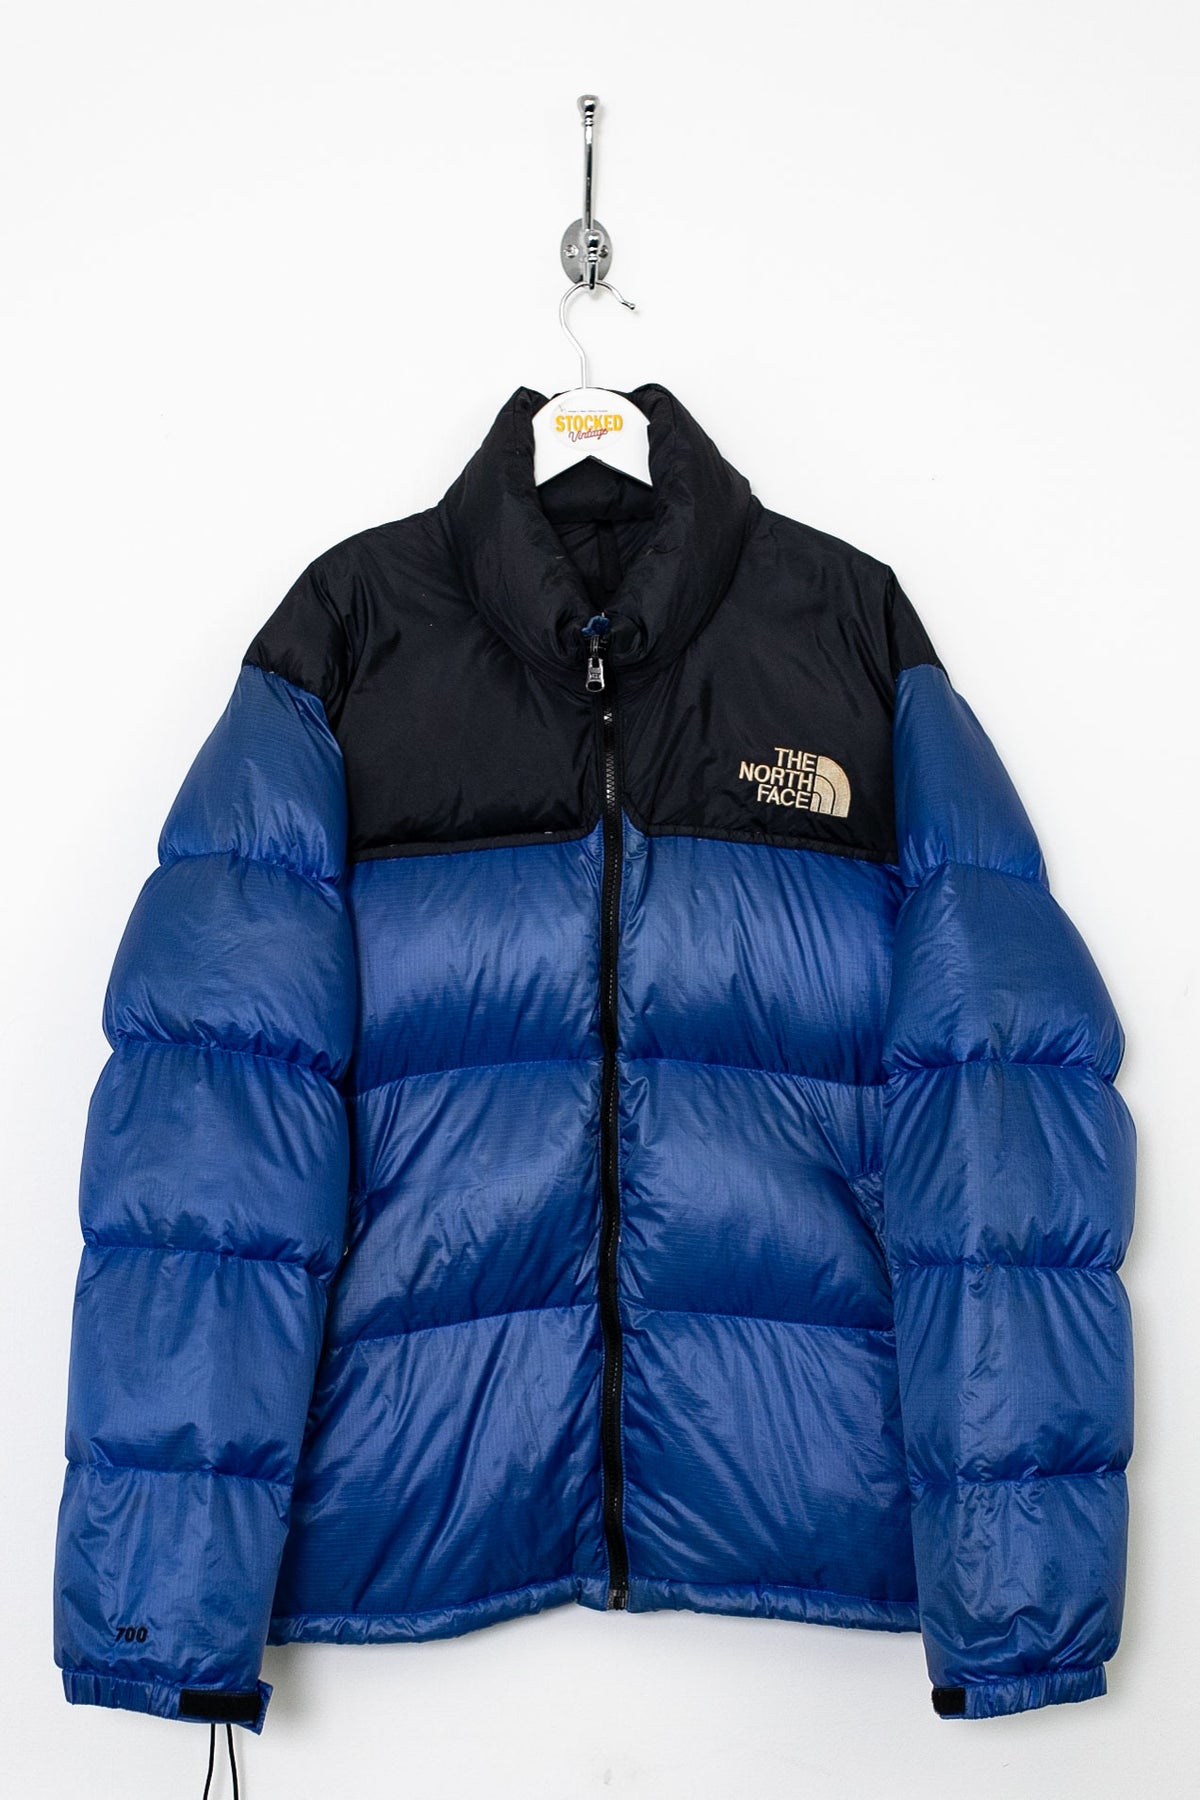 The North Face 700 Fill Nuptse Puffer Jacket (L)